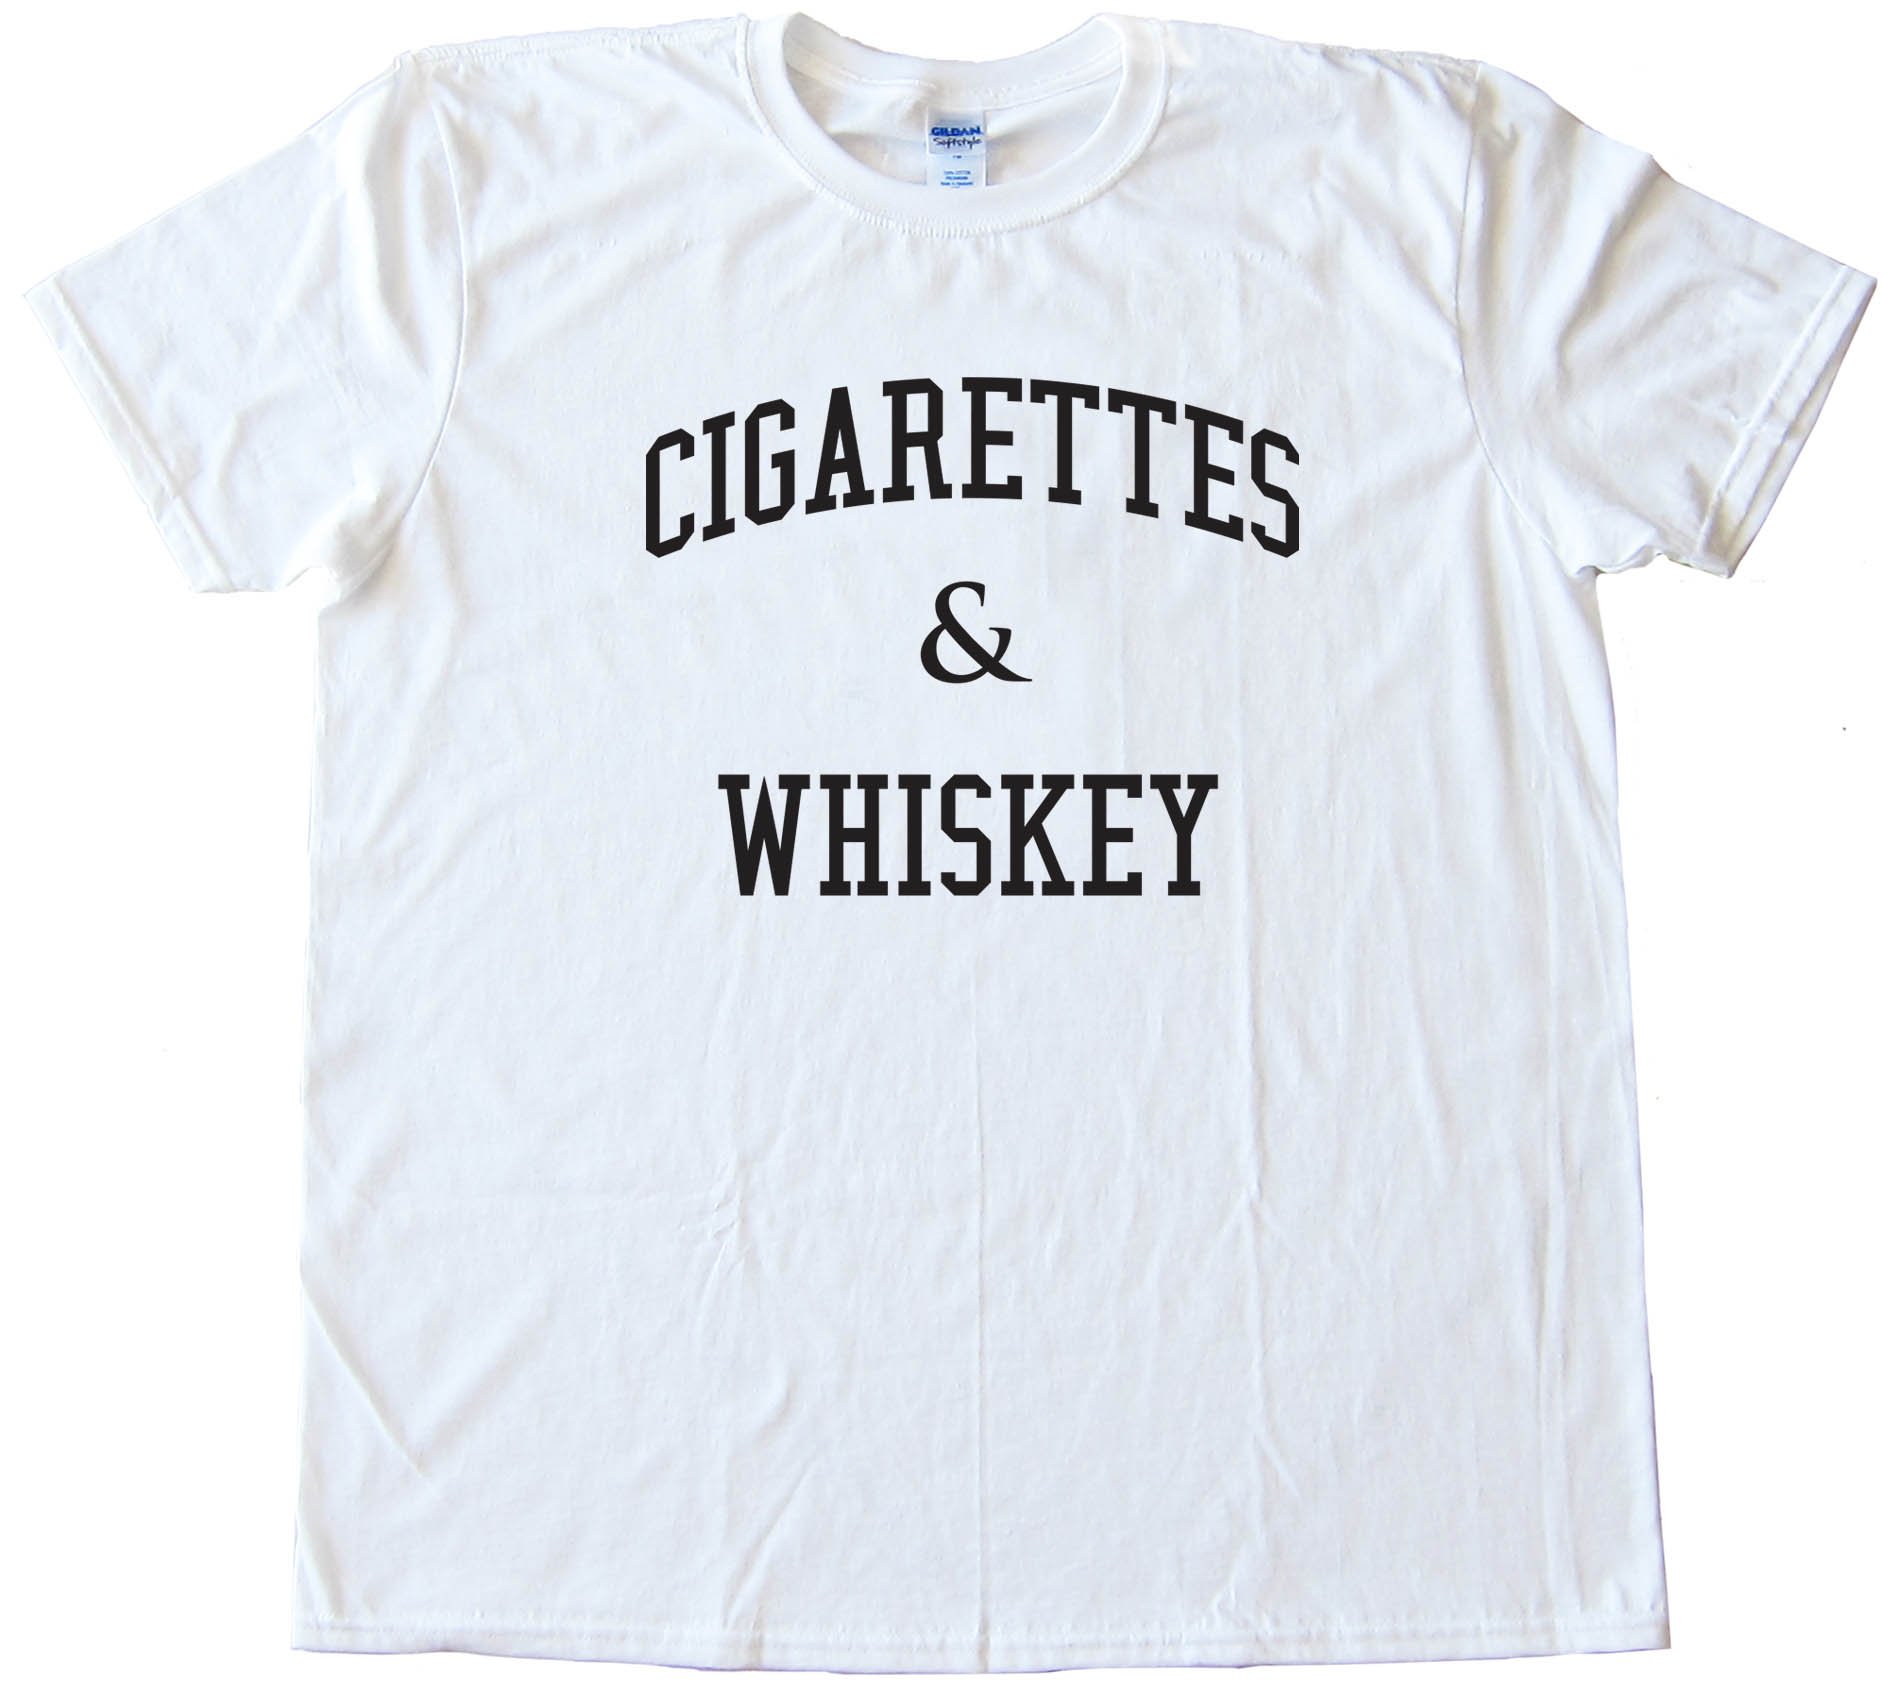 Cigarettes And Whiskey Partying - Tee Shirt